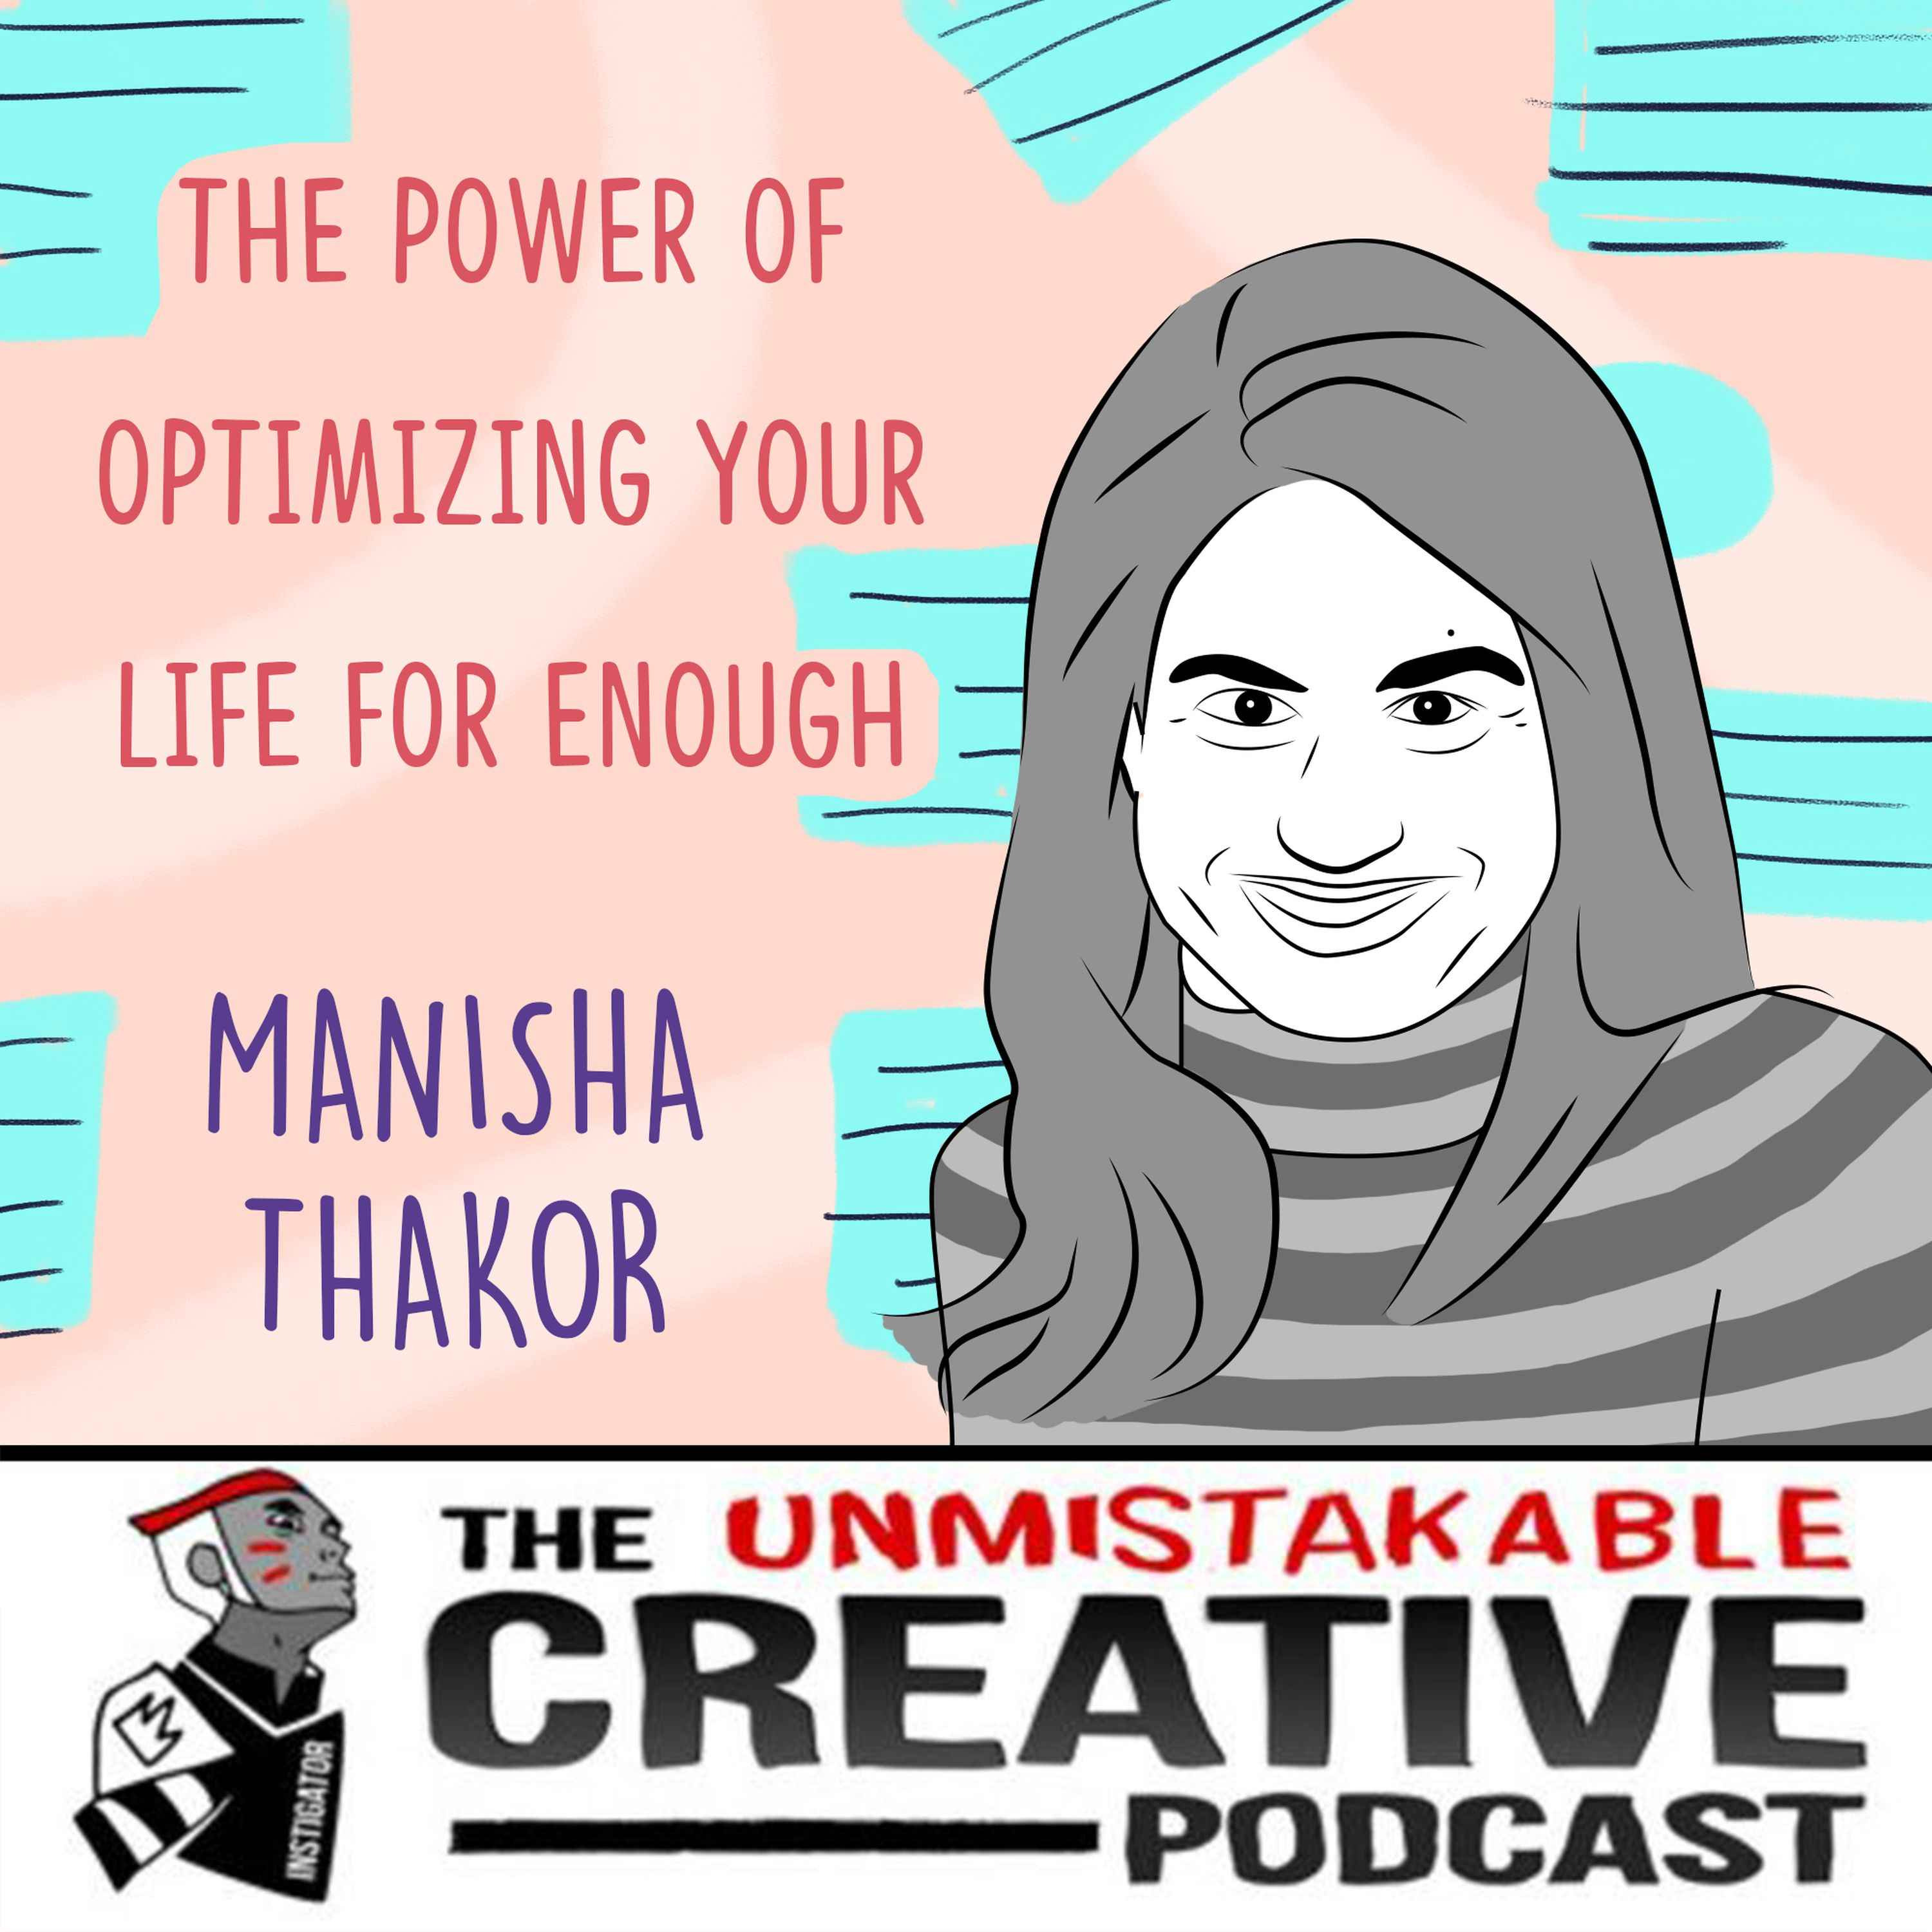 The Wisdom Series: Manisha Thakor | The Power of Optimizing Your Life for Enough Image